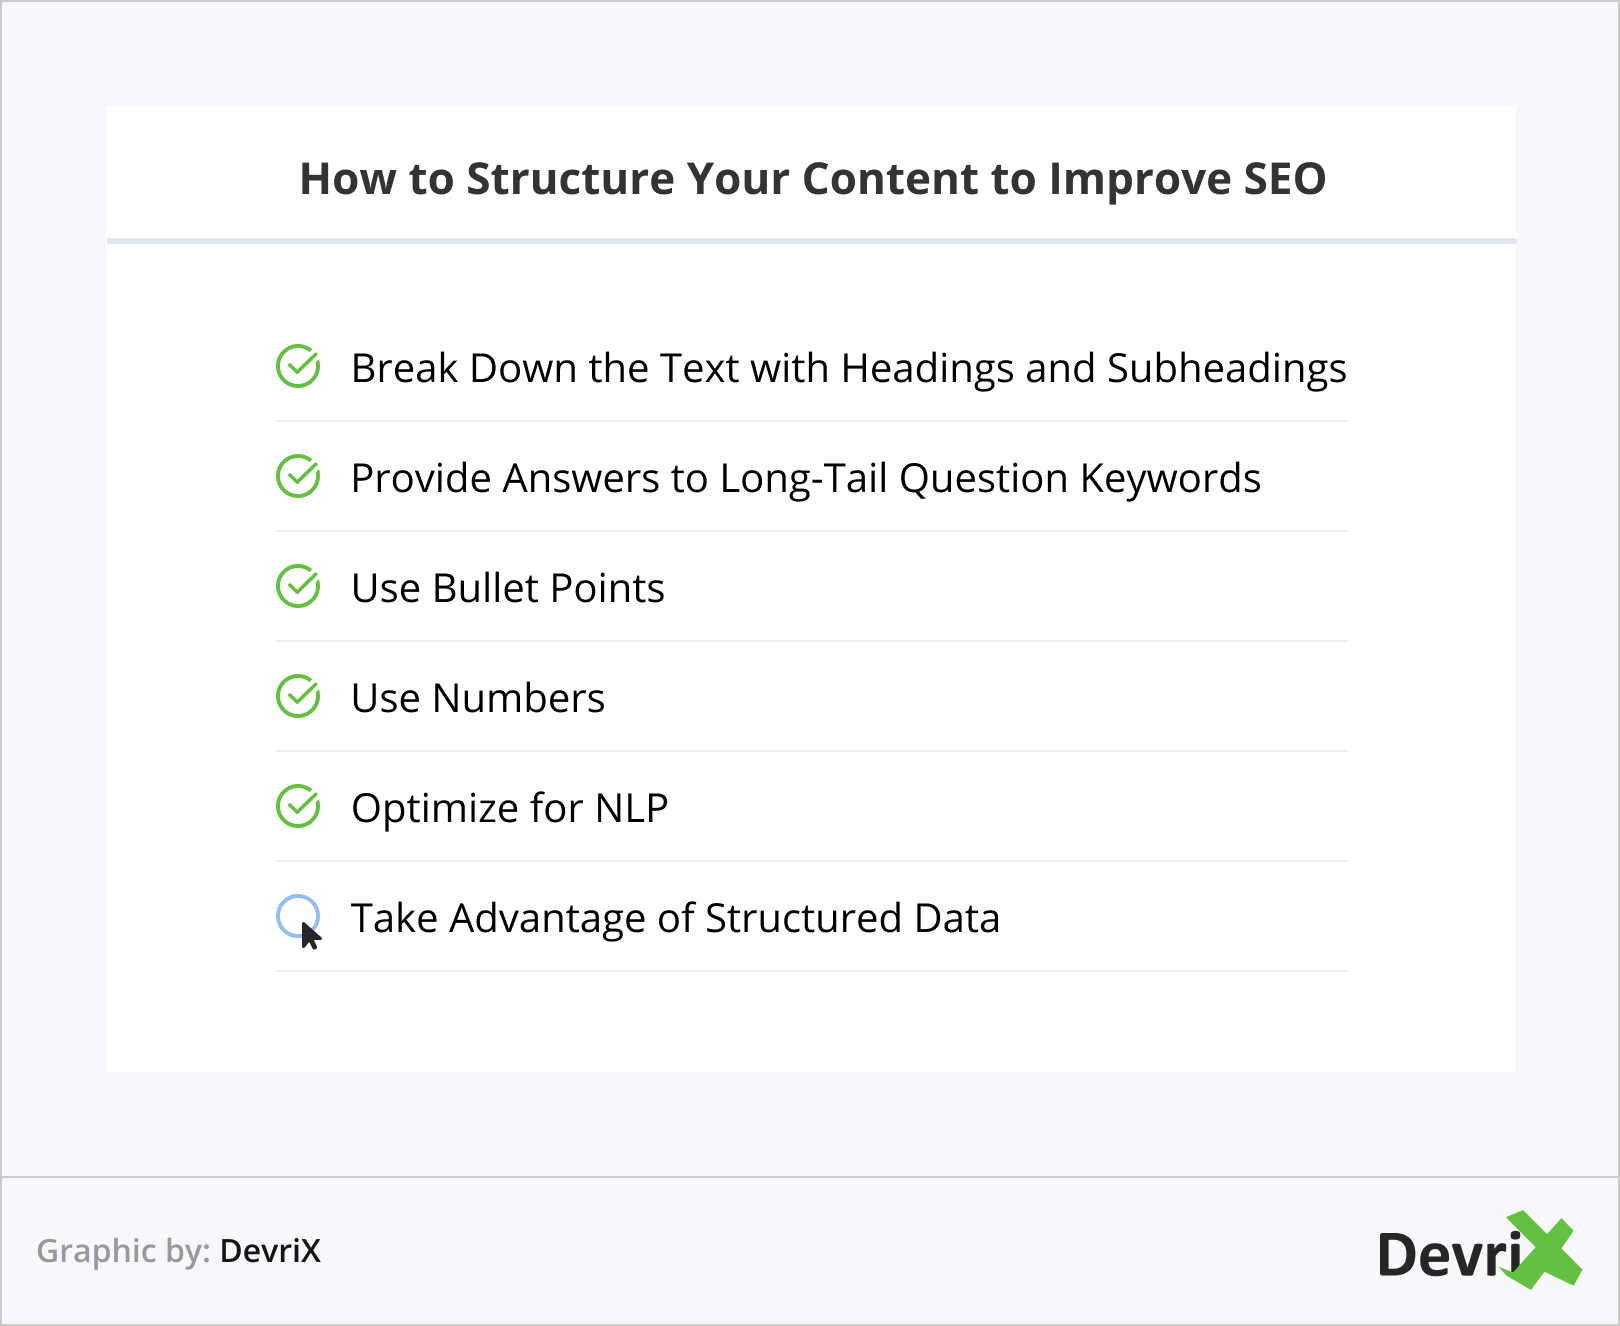 How to Structure Your Content to Improve SEO